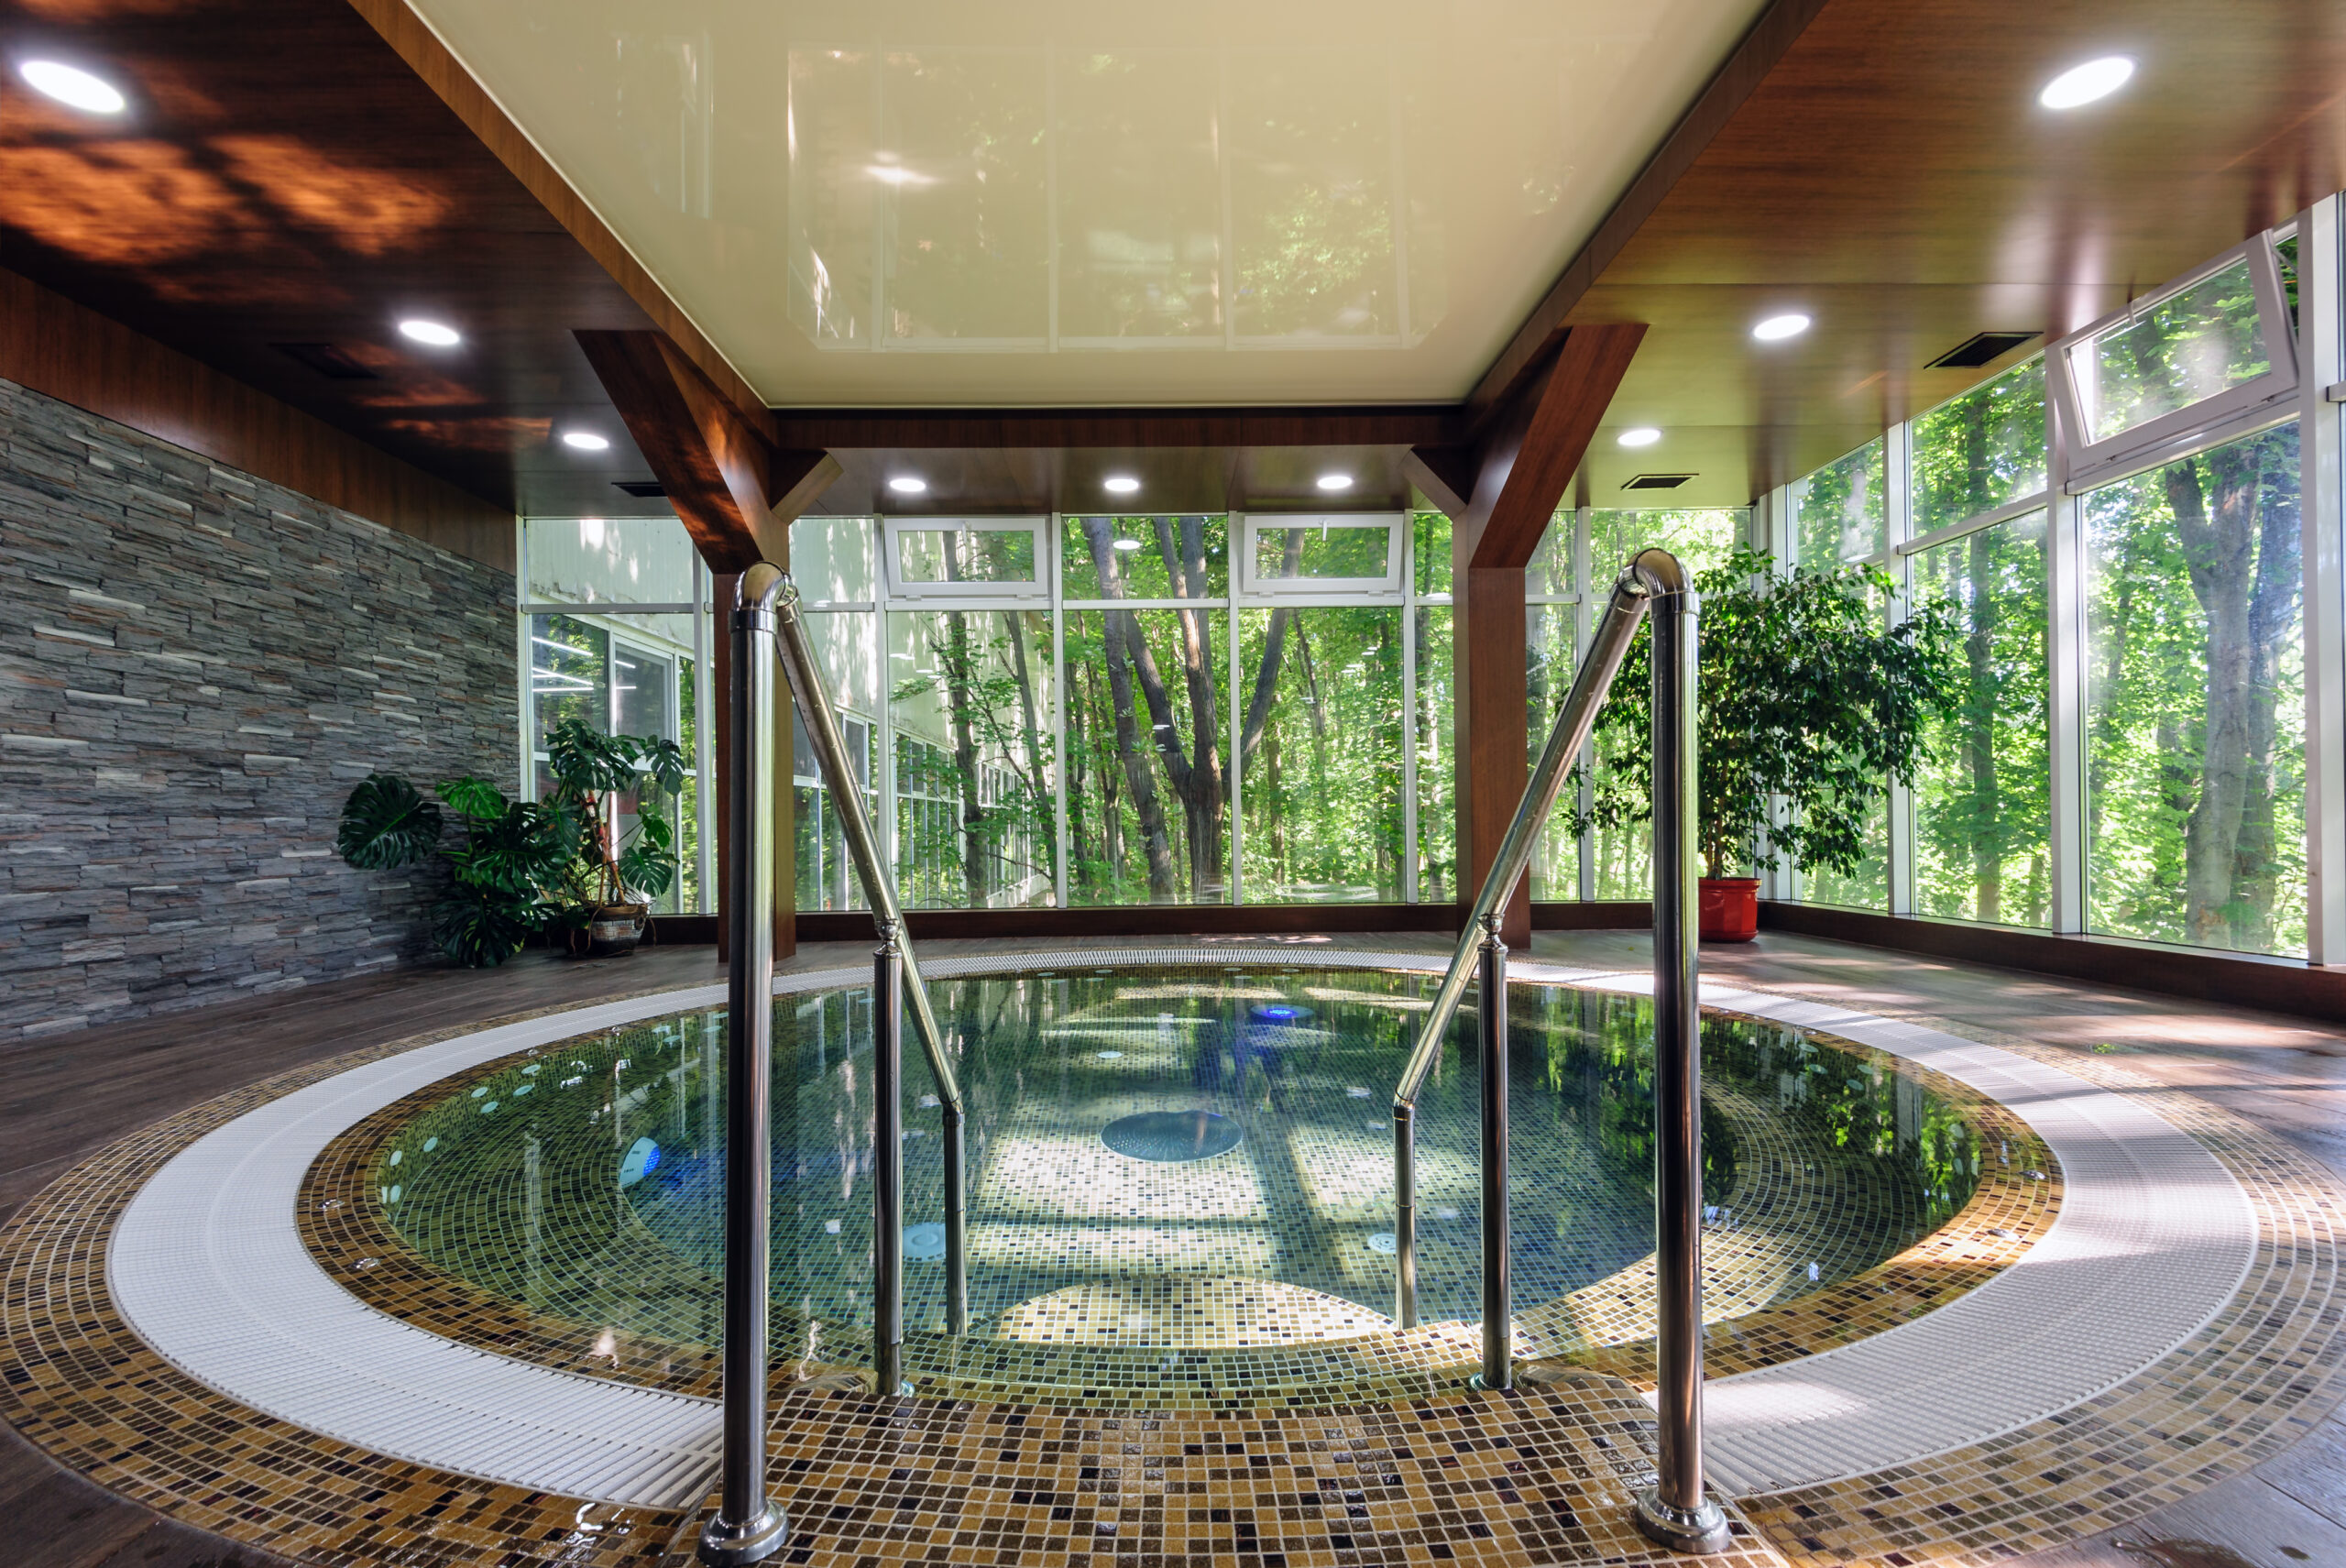 A round pool with a natural aesthetic, surrounded by lush greenery and offering a serene view of nature through glass walls or windows.